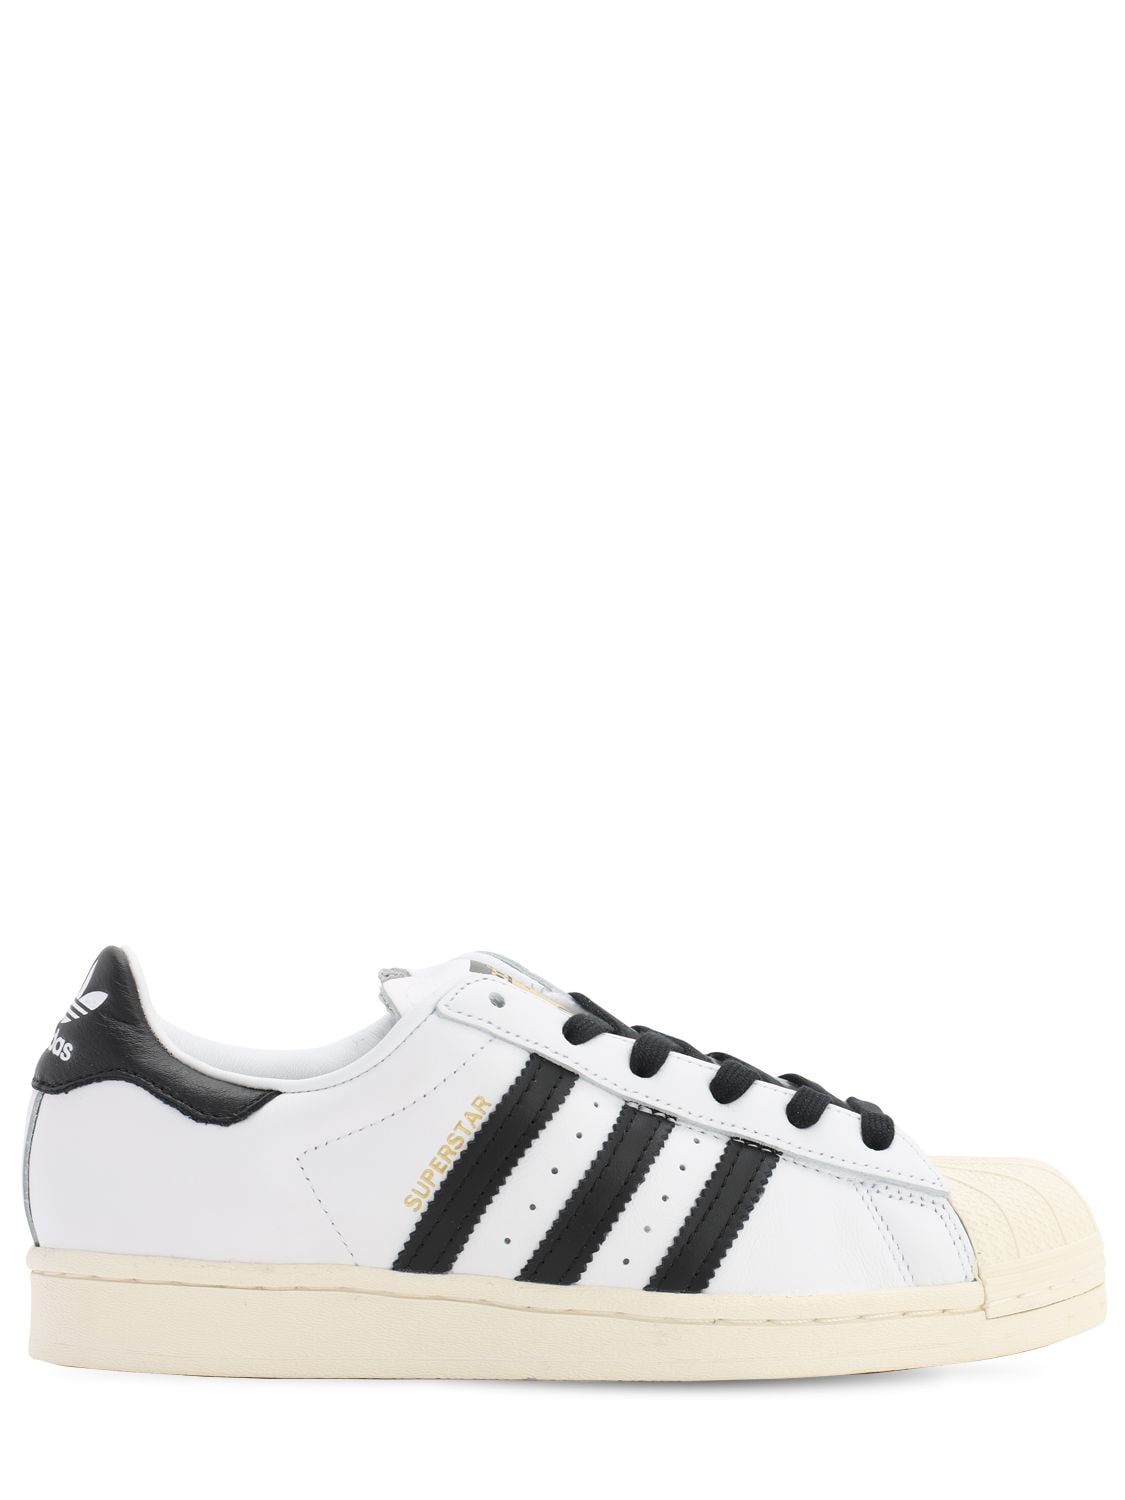 Adidas Originals - Superstar laceless courtside sneakers - White ...